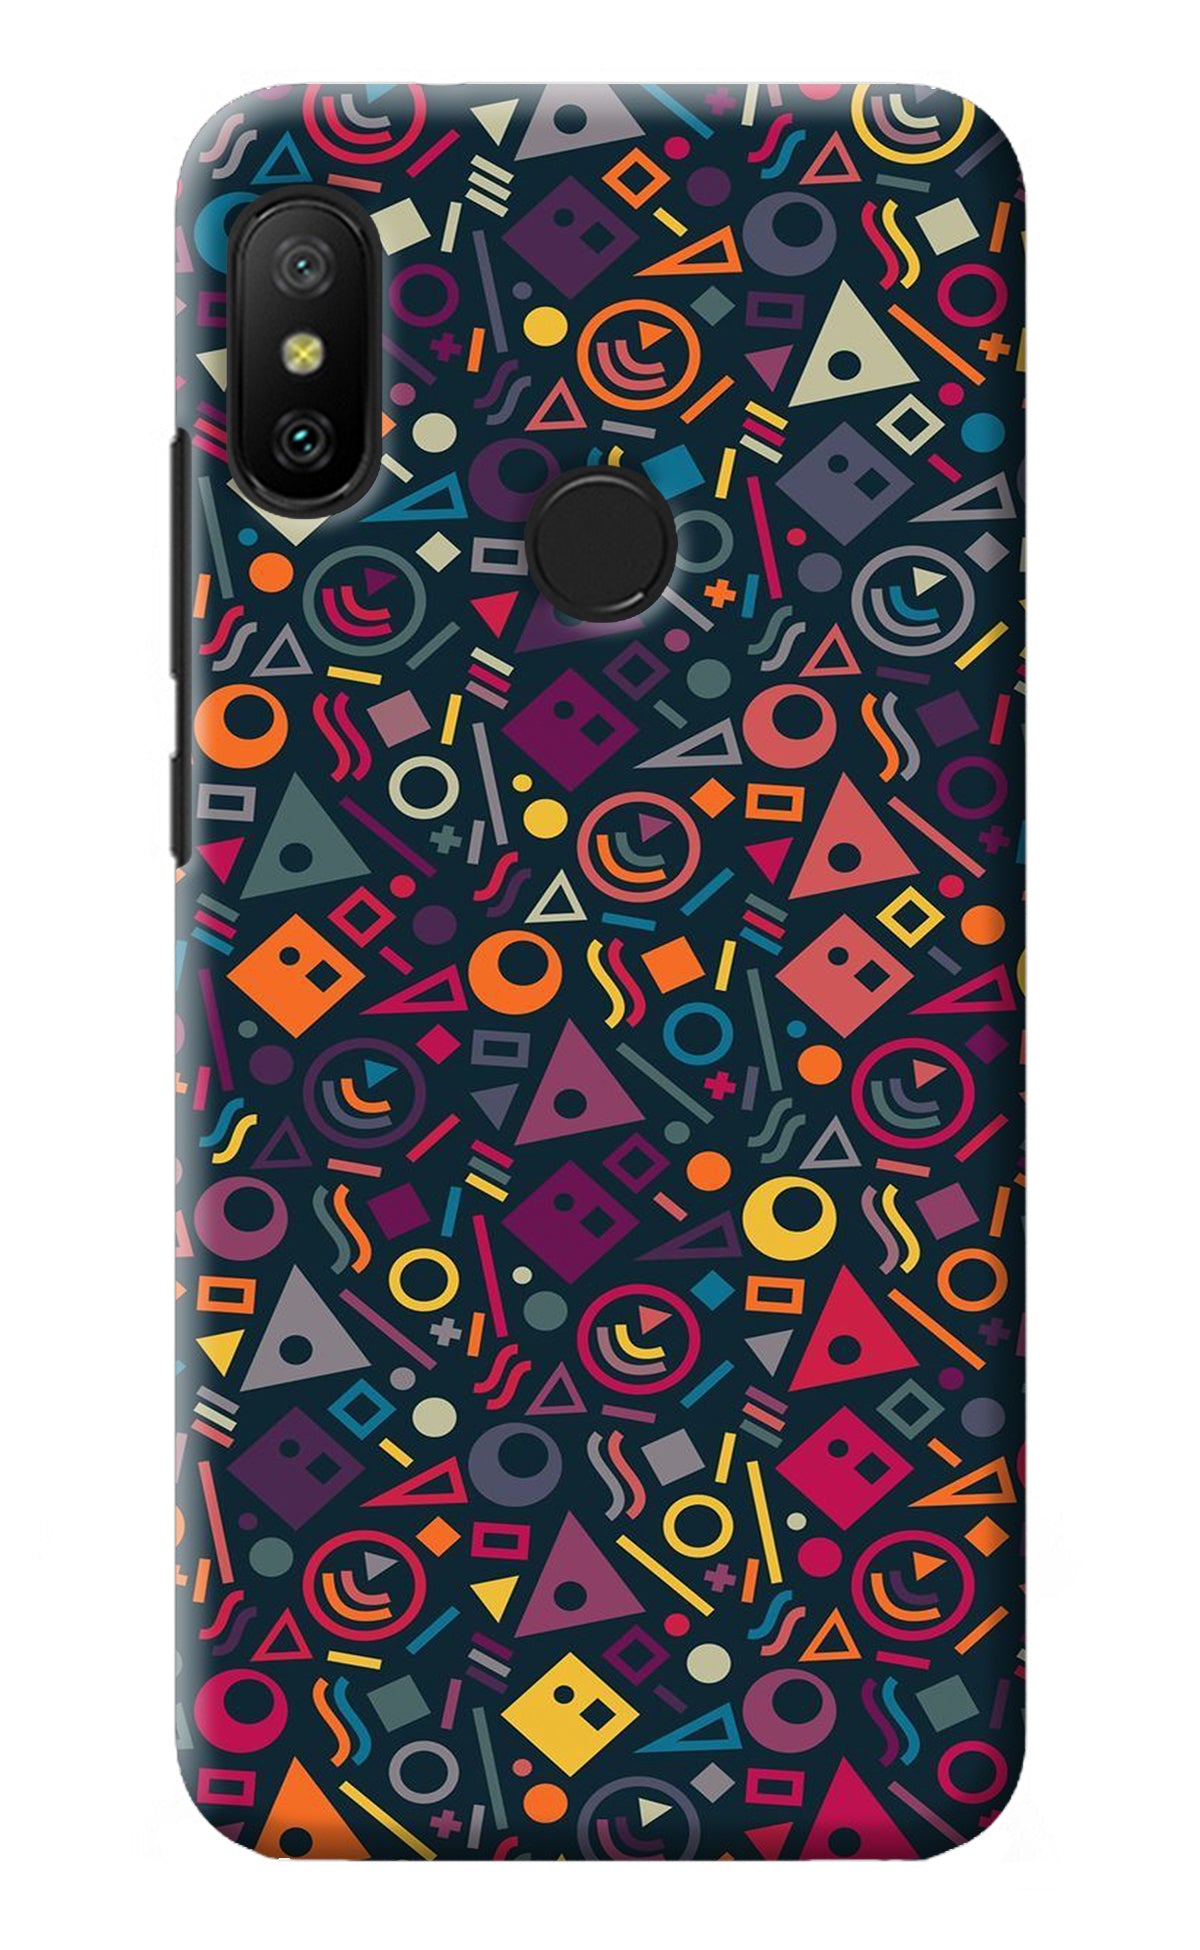 Geometric Abstract Redmi 6 Pro Back Cover